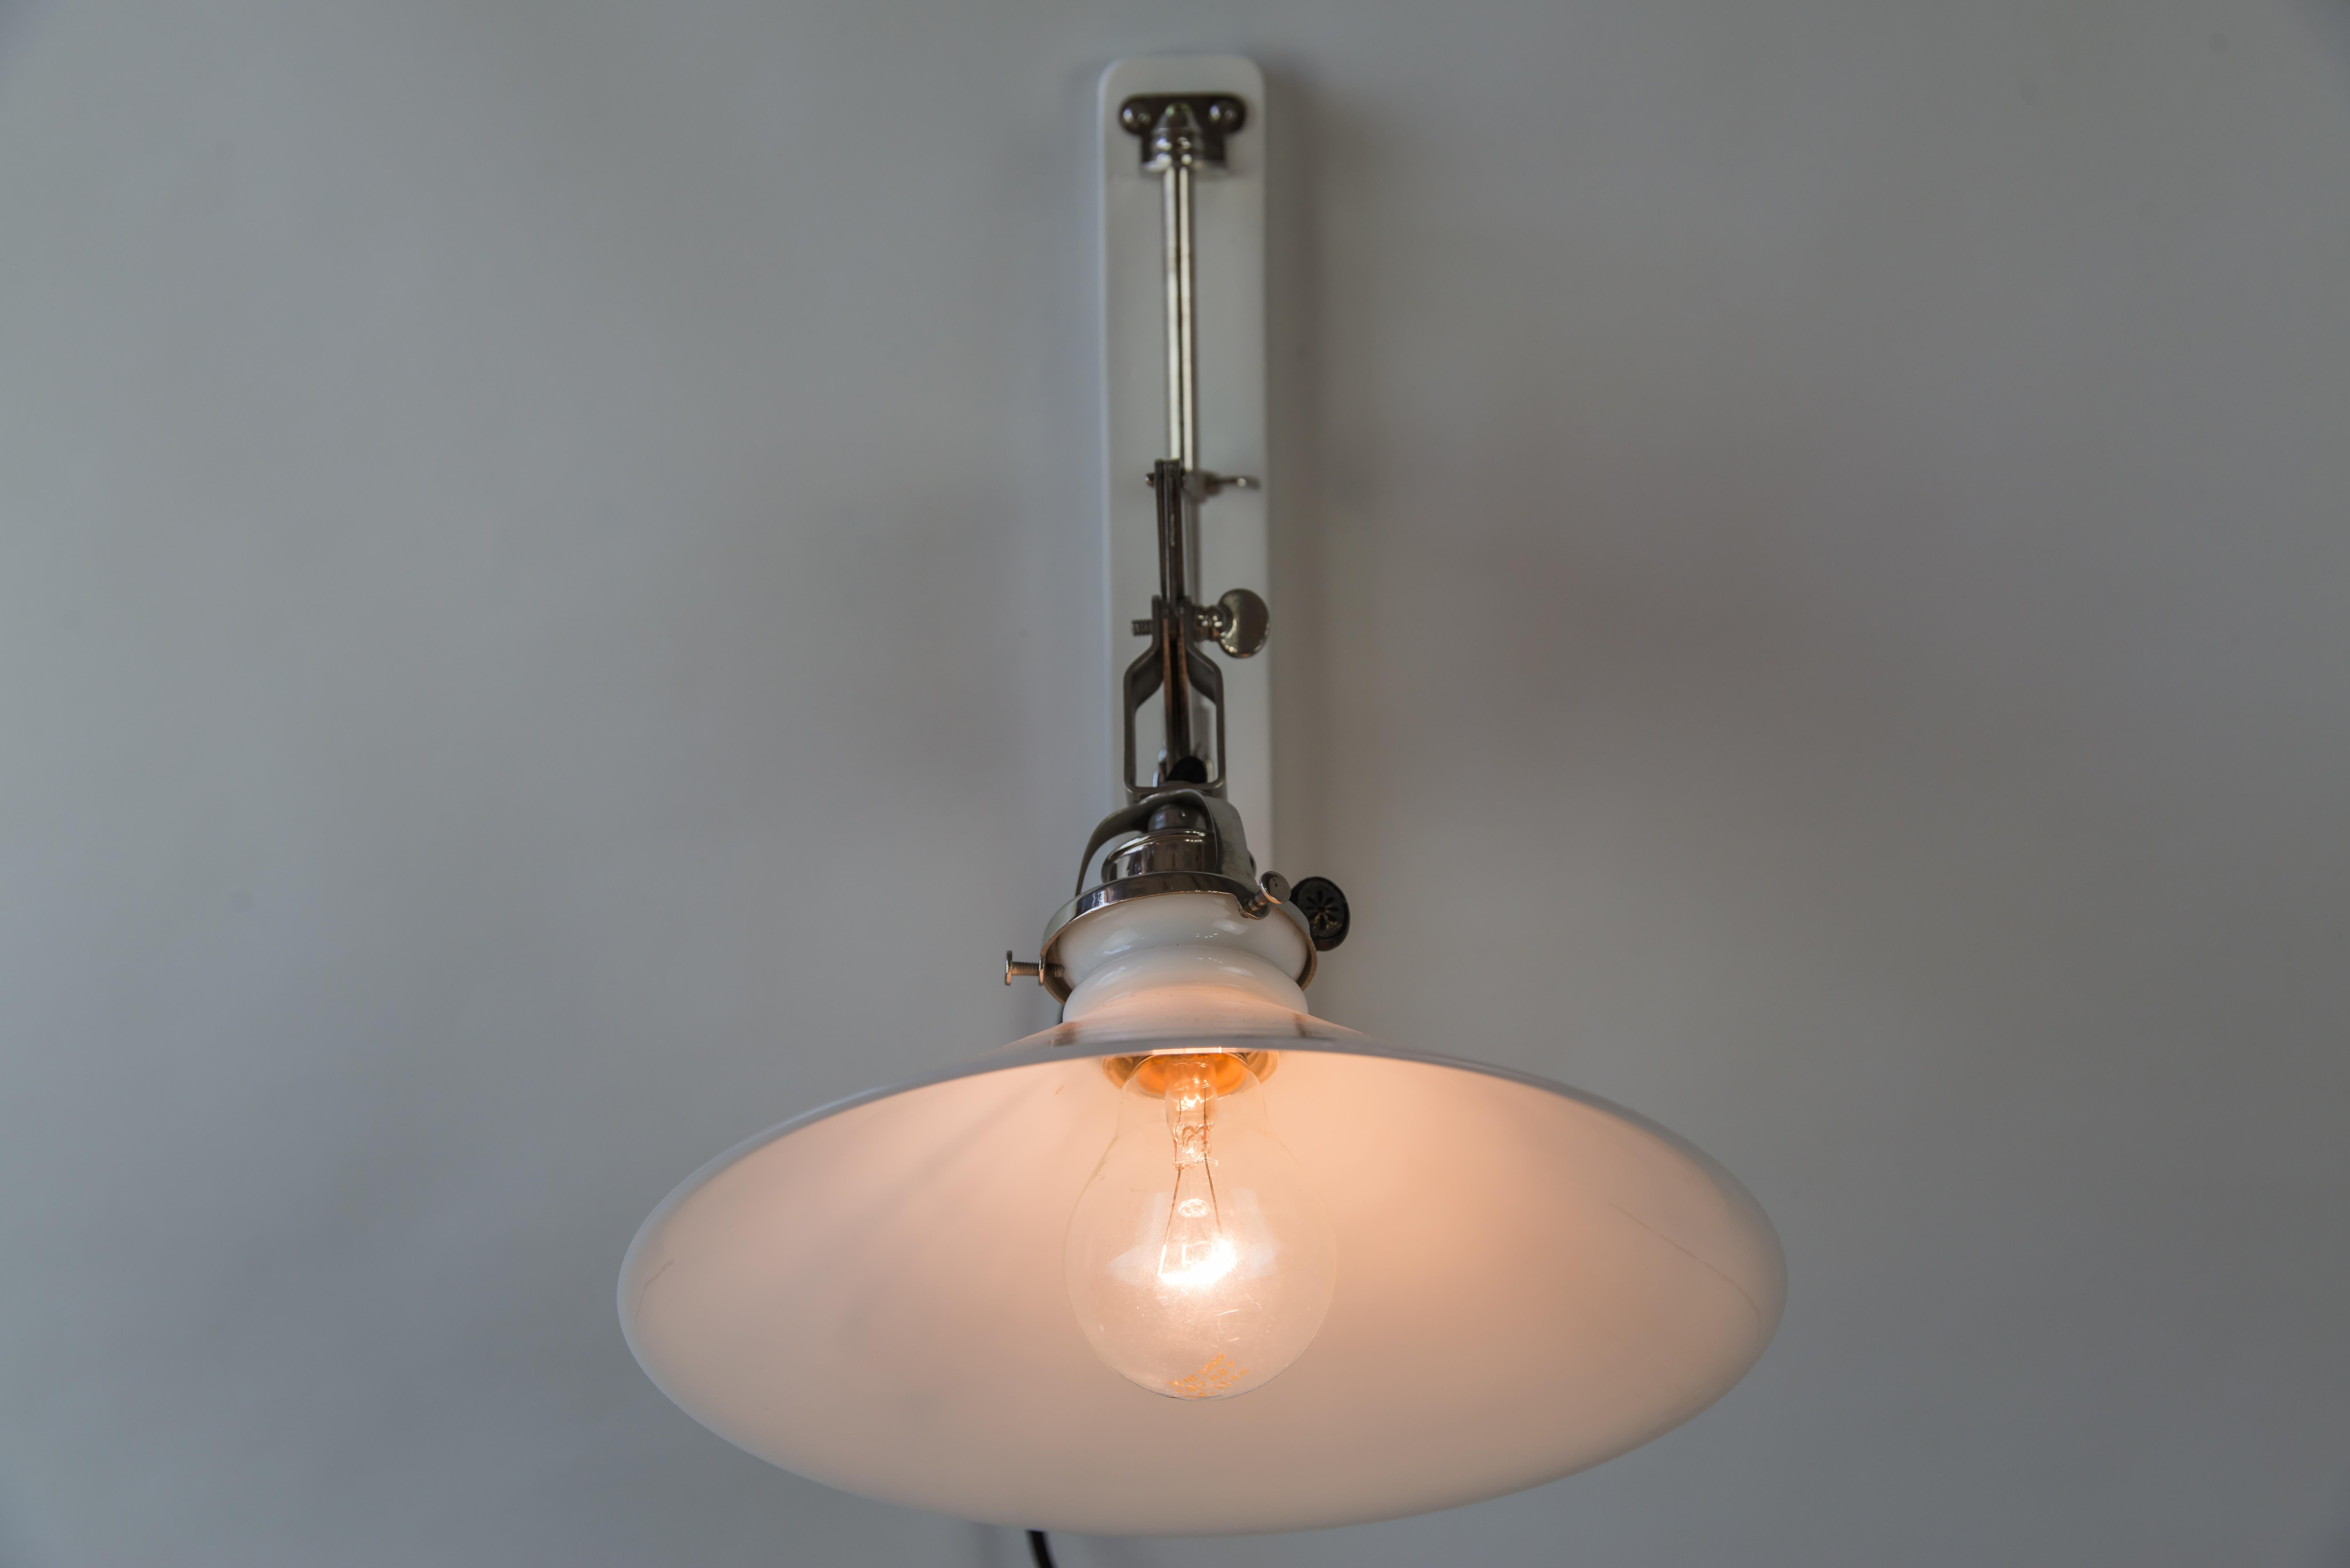 Art Deco Swiweling and Extendable Nickel Wall Lamp with Glass Shade, circa 1920s For Sale 4